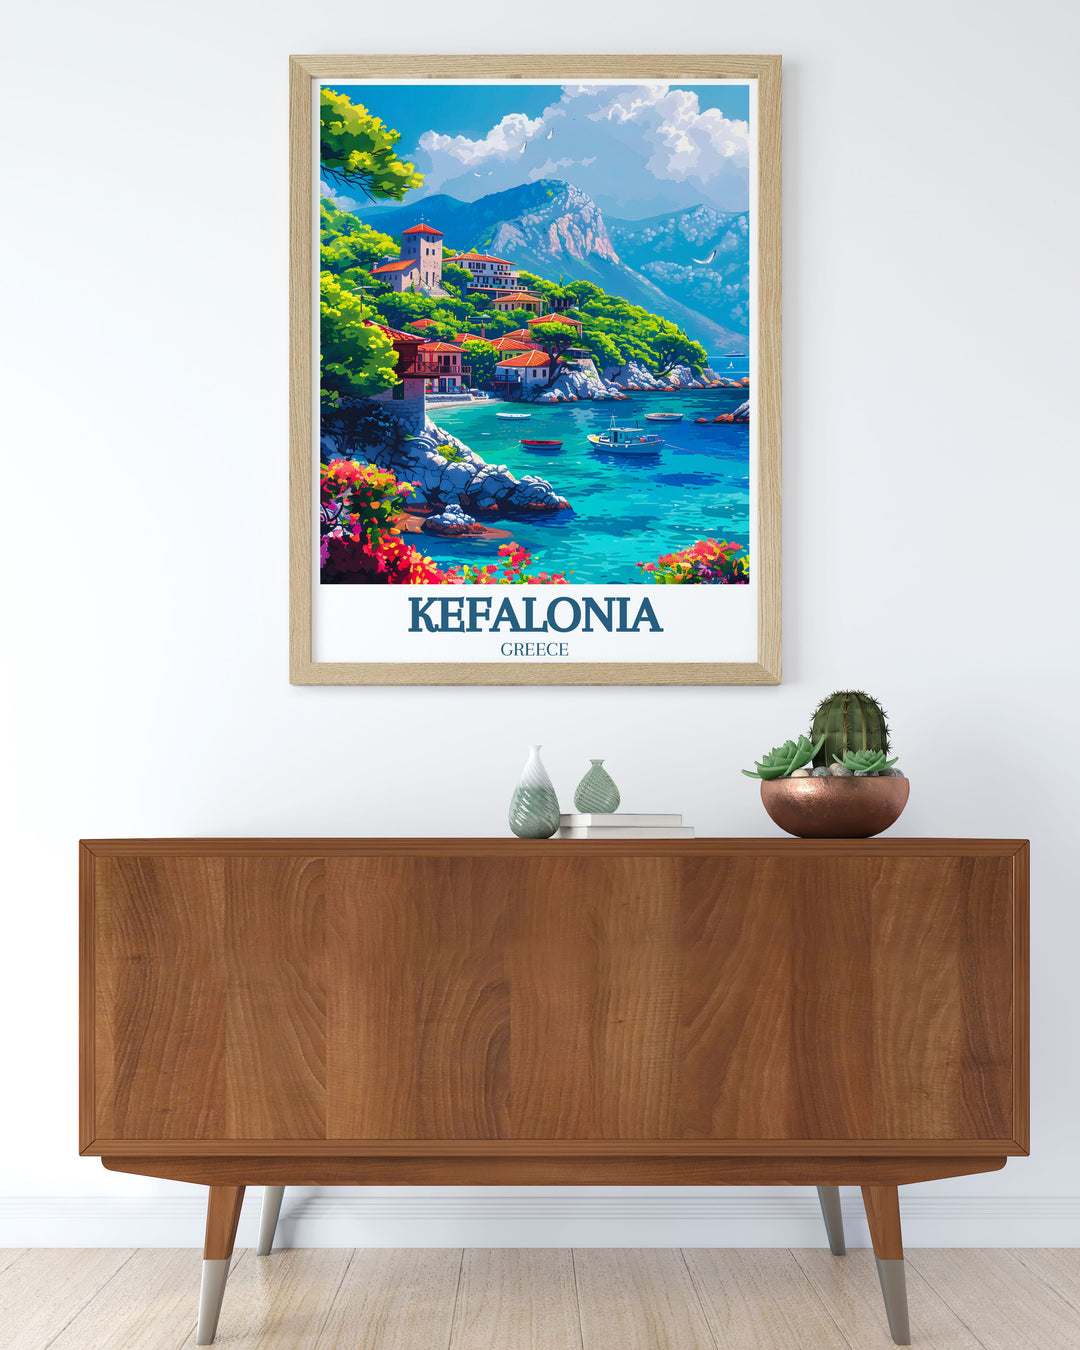 Captivating view of Kefalonia, featuring its stunning landscapes, pristine beaches, and charming villages. The travel poster offers a glimpse into the islands diverse beauty and rich heritage.